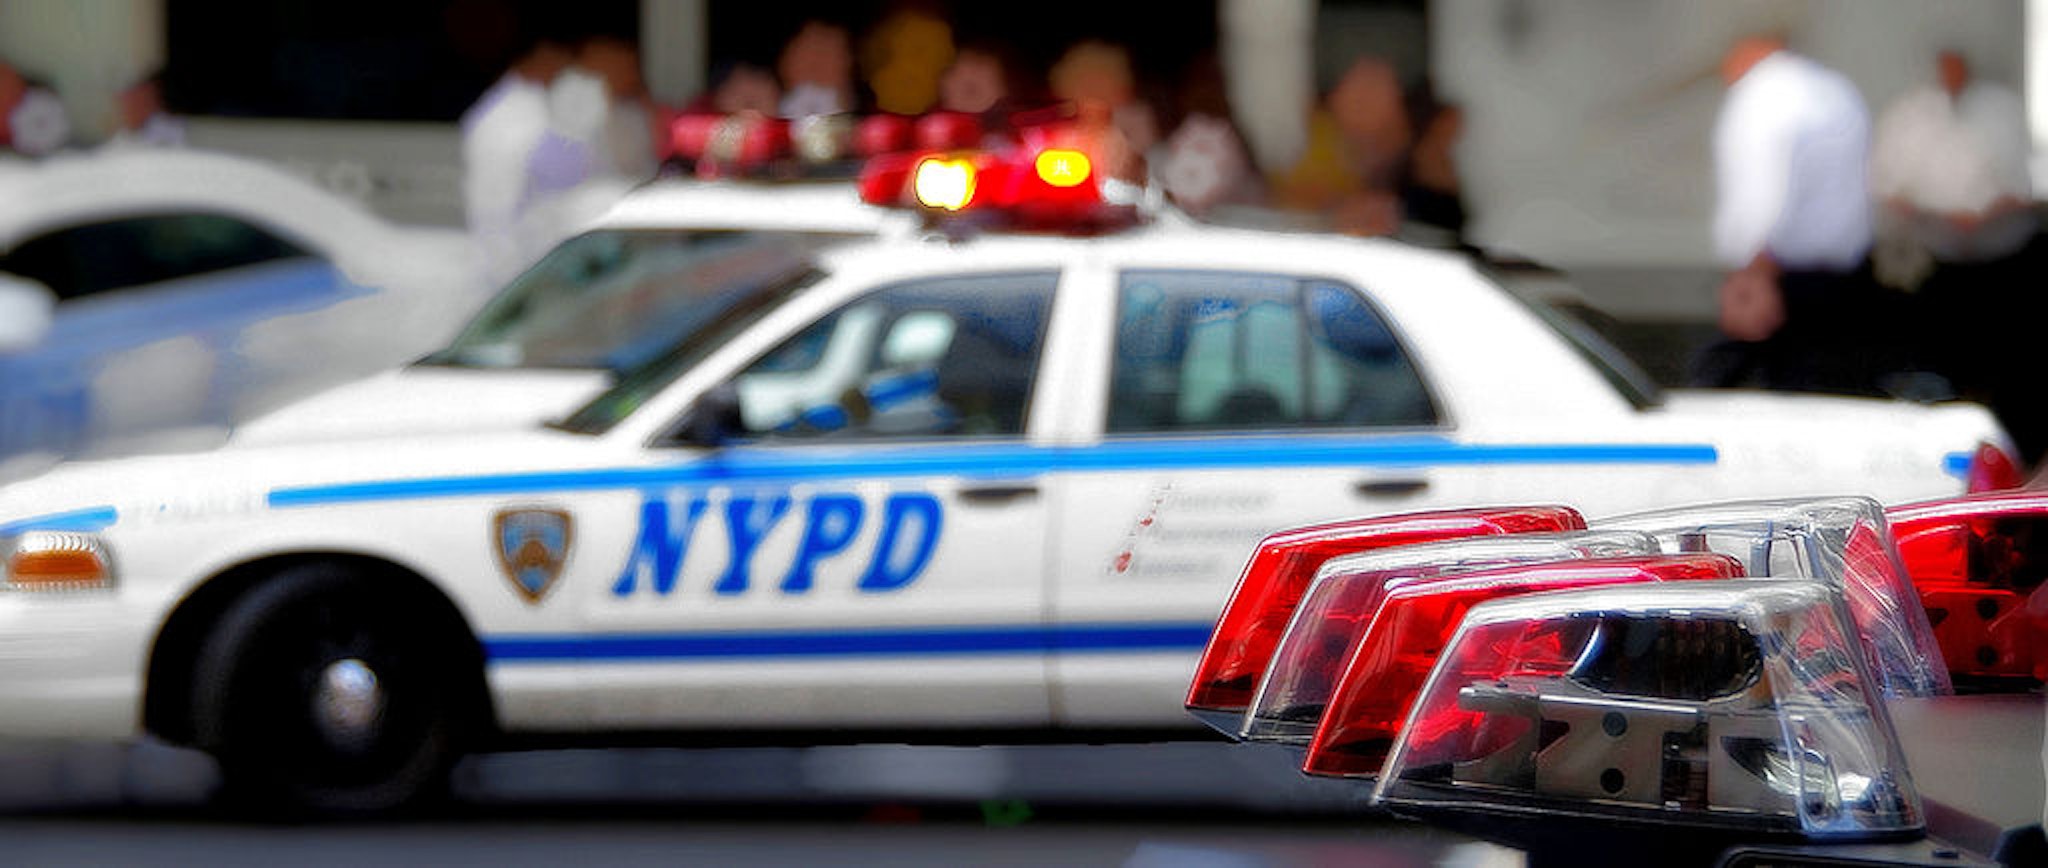 [UNVERIFIED CONTENT] Perspective view on NYPD Patrol Cars Lights and Sirens (Getty Images)